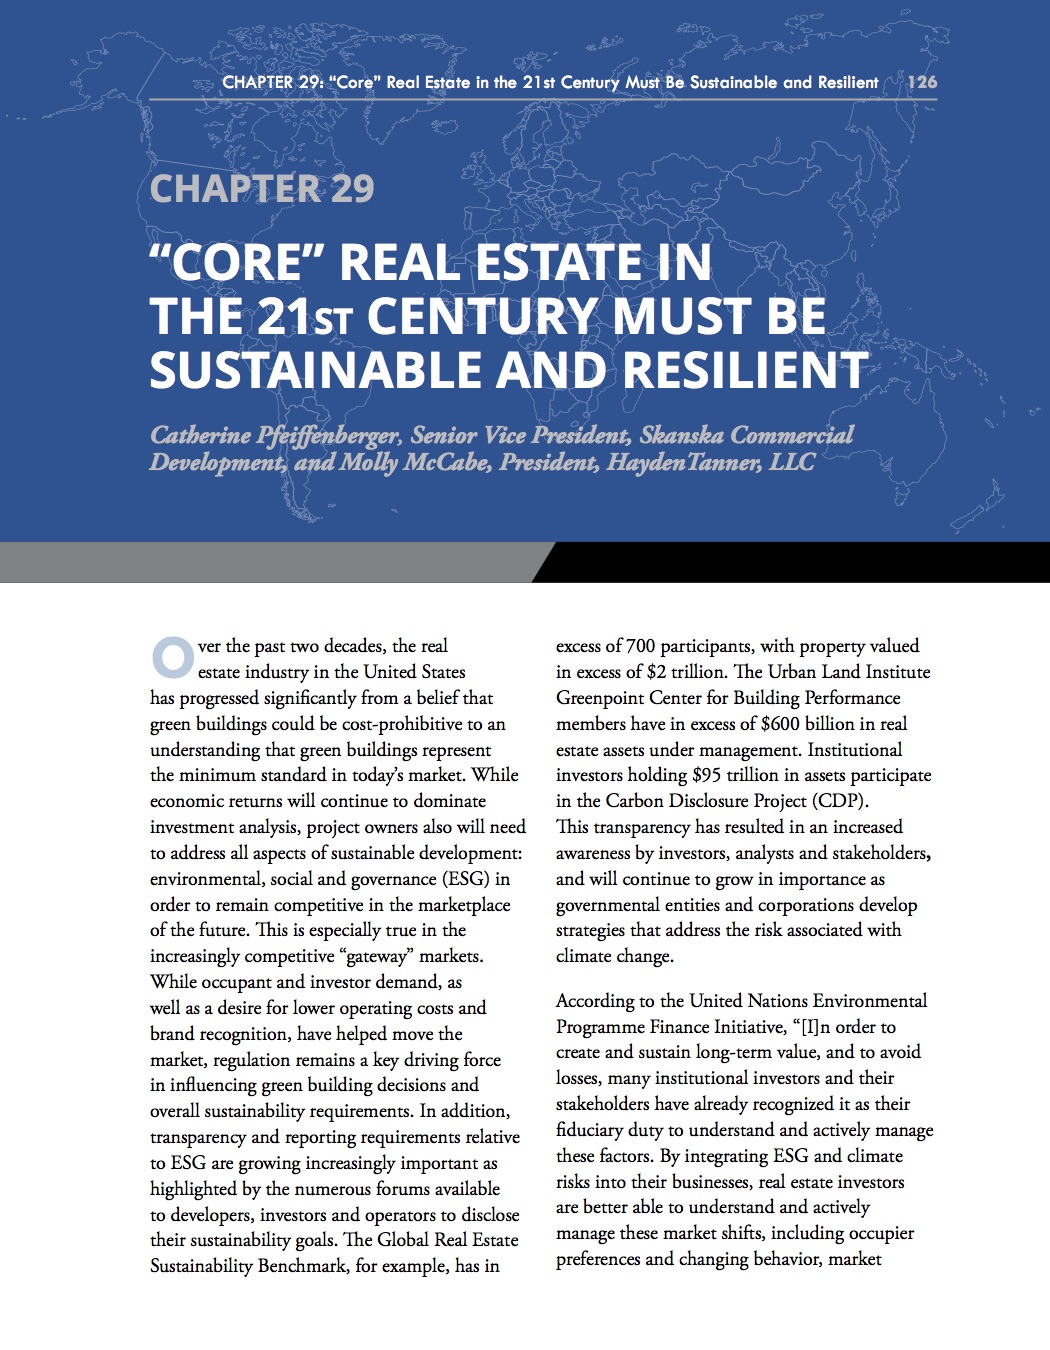 AFIRE Core Real Estate Sustainable